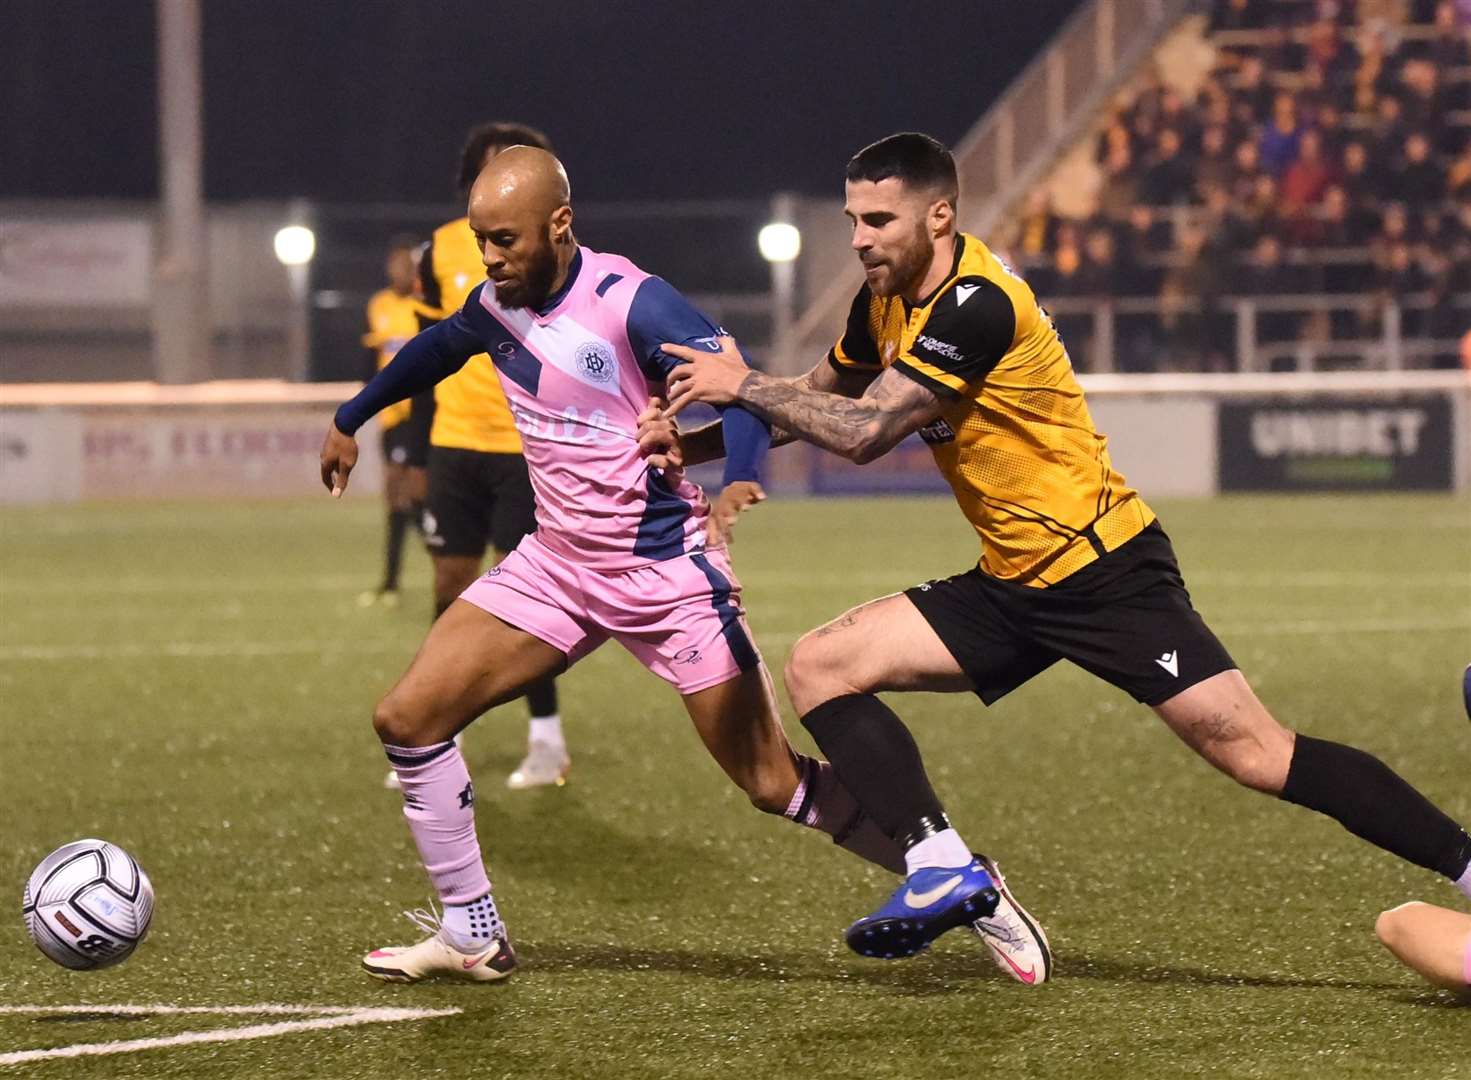 Maidstone winger Joan Luque puts a Dulwich Hamlet player under pressure during the Stones' 2-0 win on Tuesday. Picture: Steve Terrell